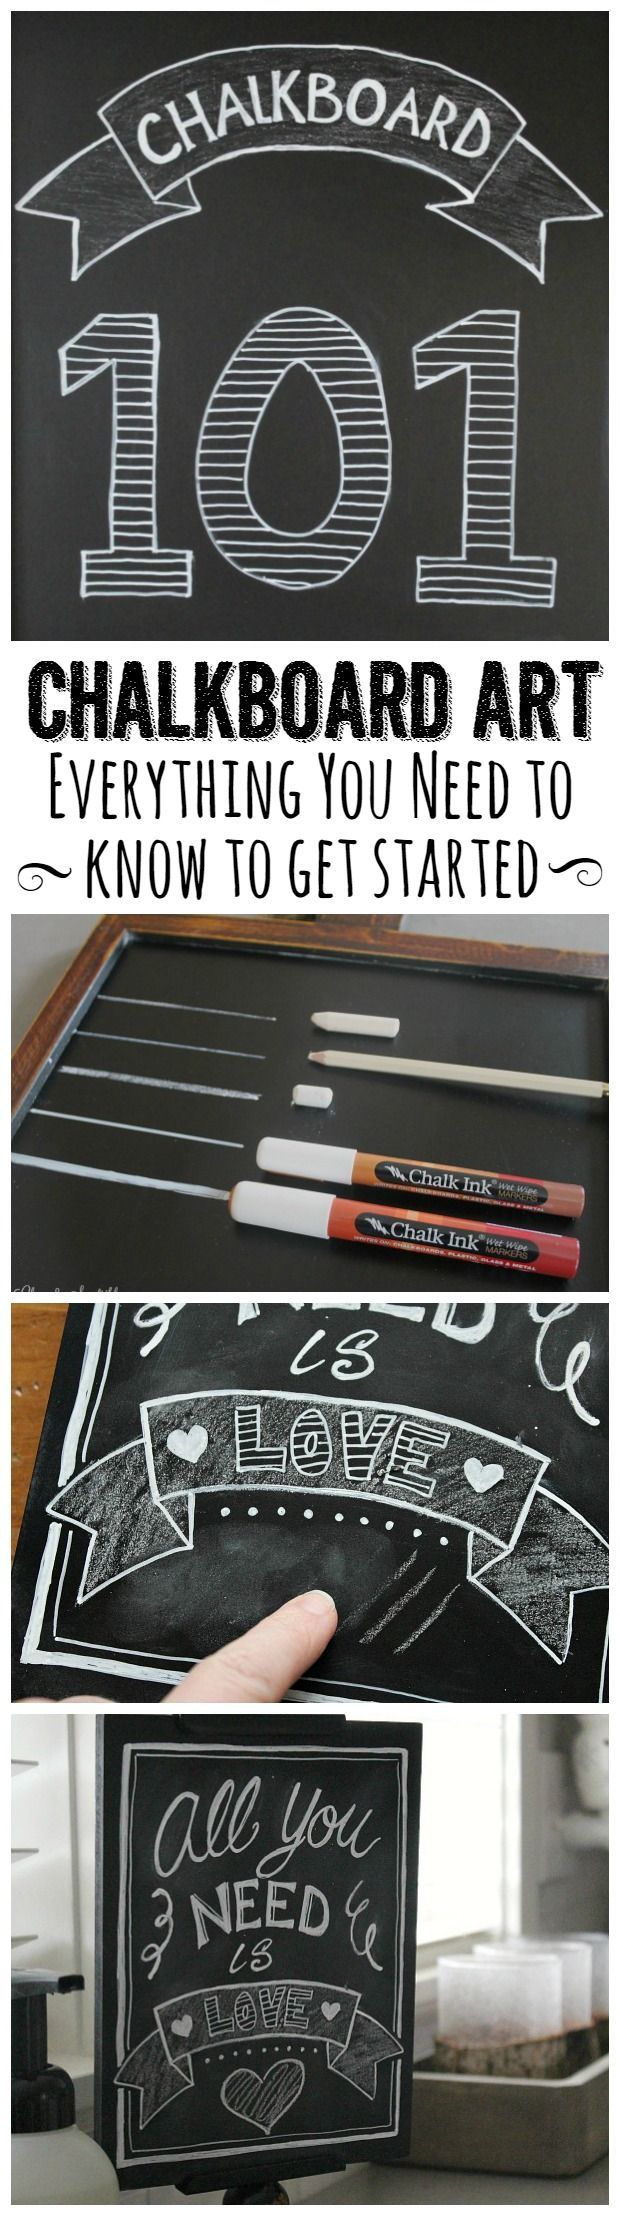 Great tips for creating your own chalkboard art!  Everything you need including how to get rid of ghosting